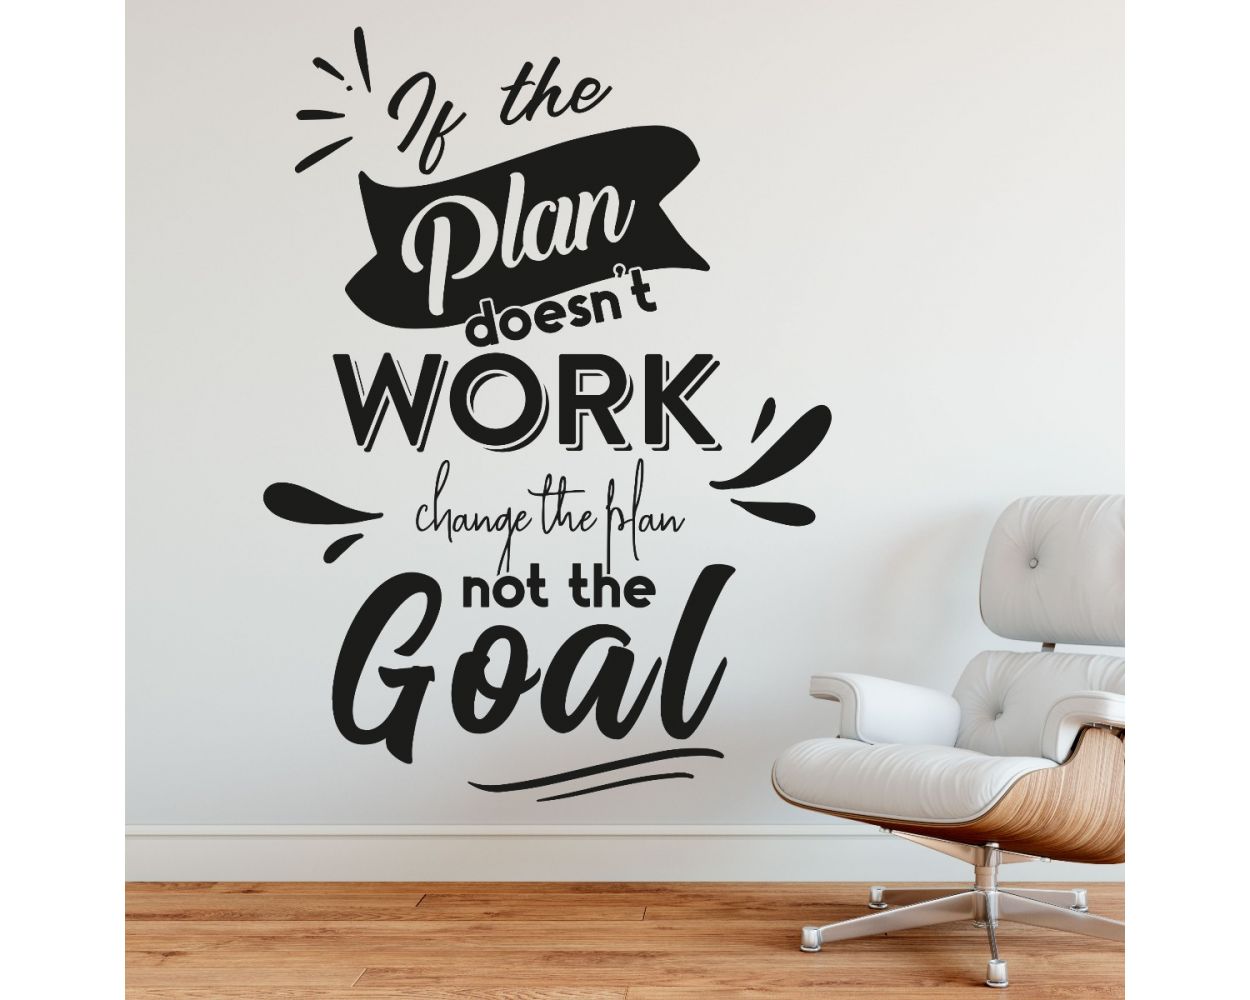 Motivational Quotes wall Stickers, Office Wall Sticker